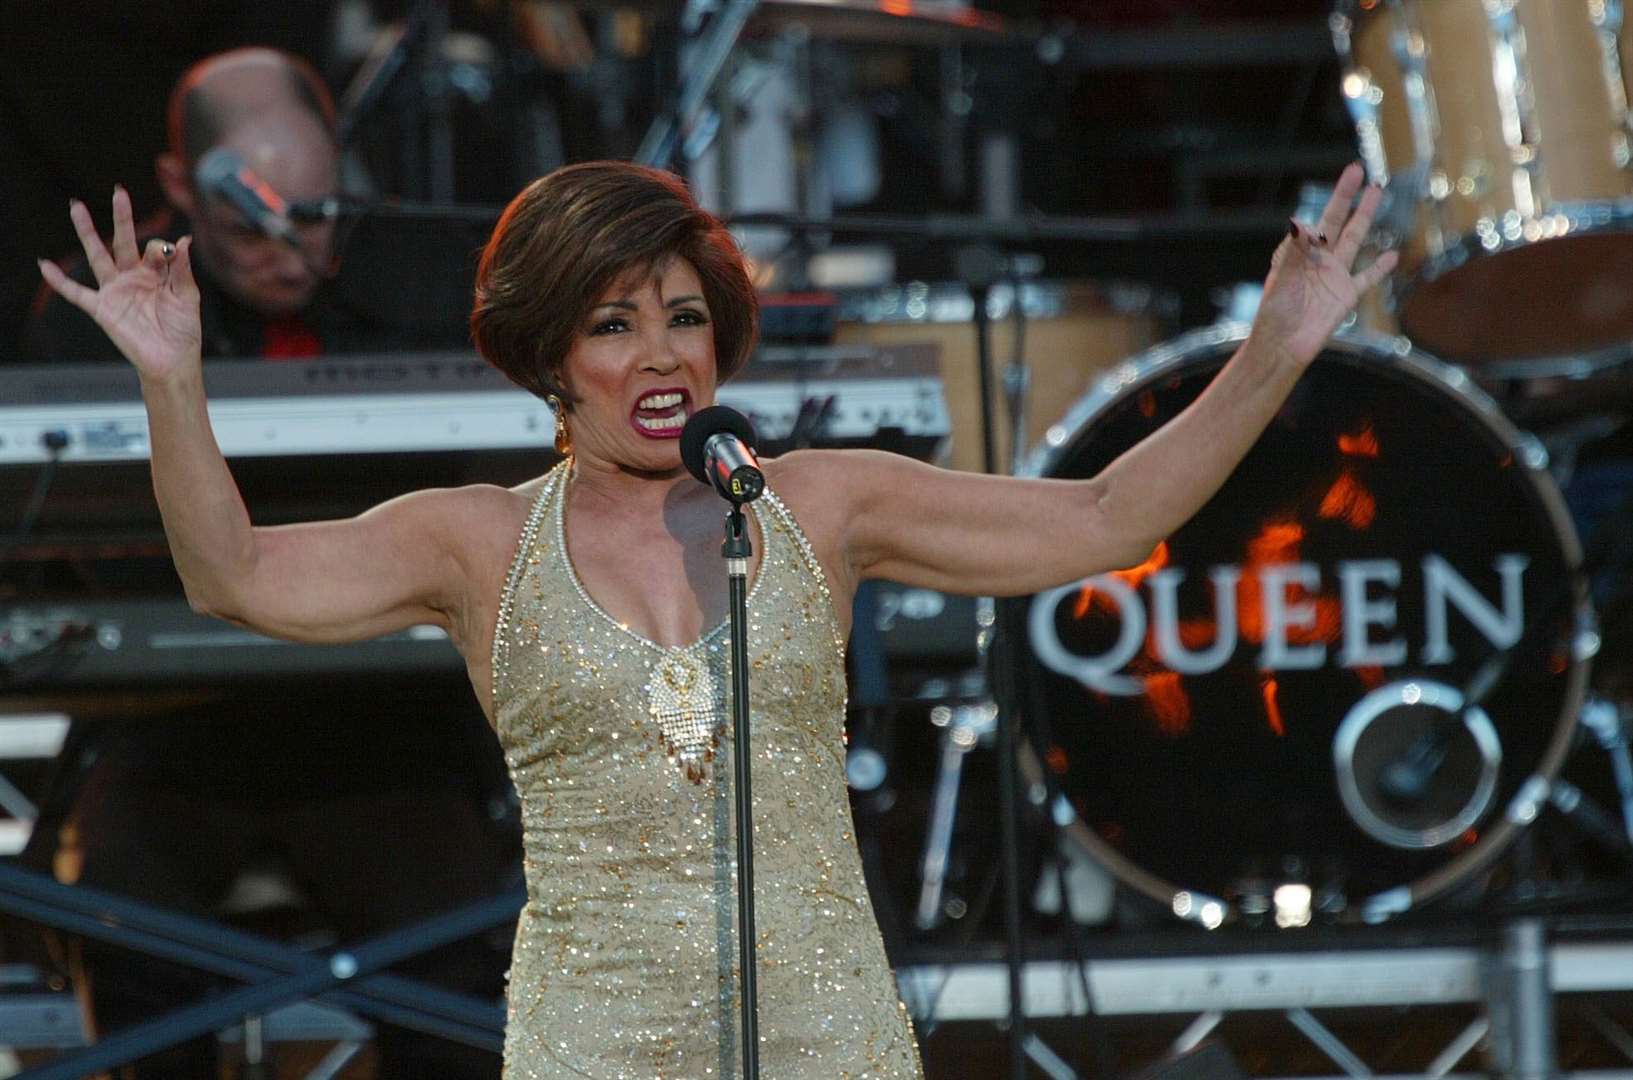 Dame Shirley Bassey performed at the Golden Jubilee pop concert in the gardens of Buckingham Palace in London in 2002. Photo: PA/REUTERS/Stephen Hird